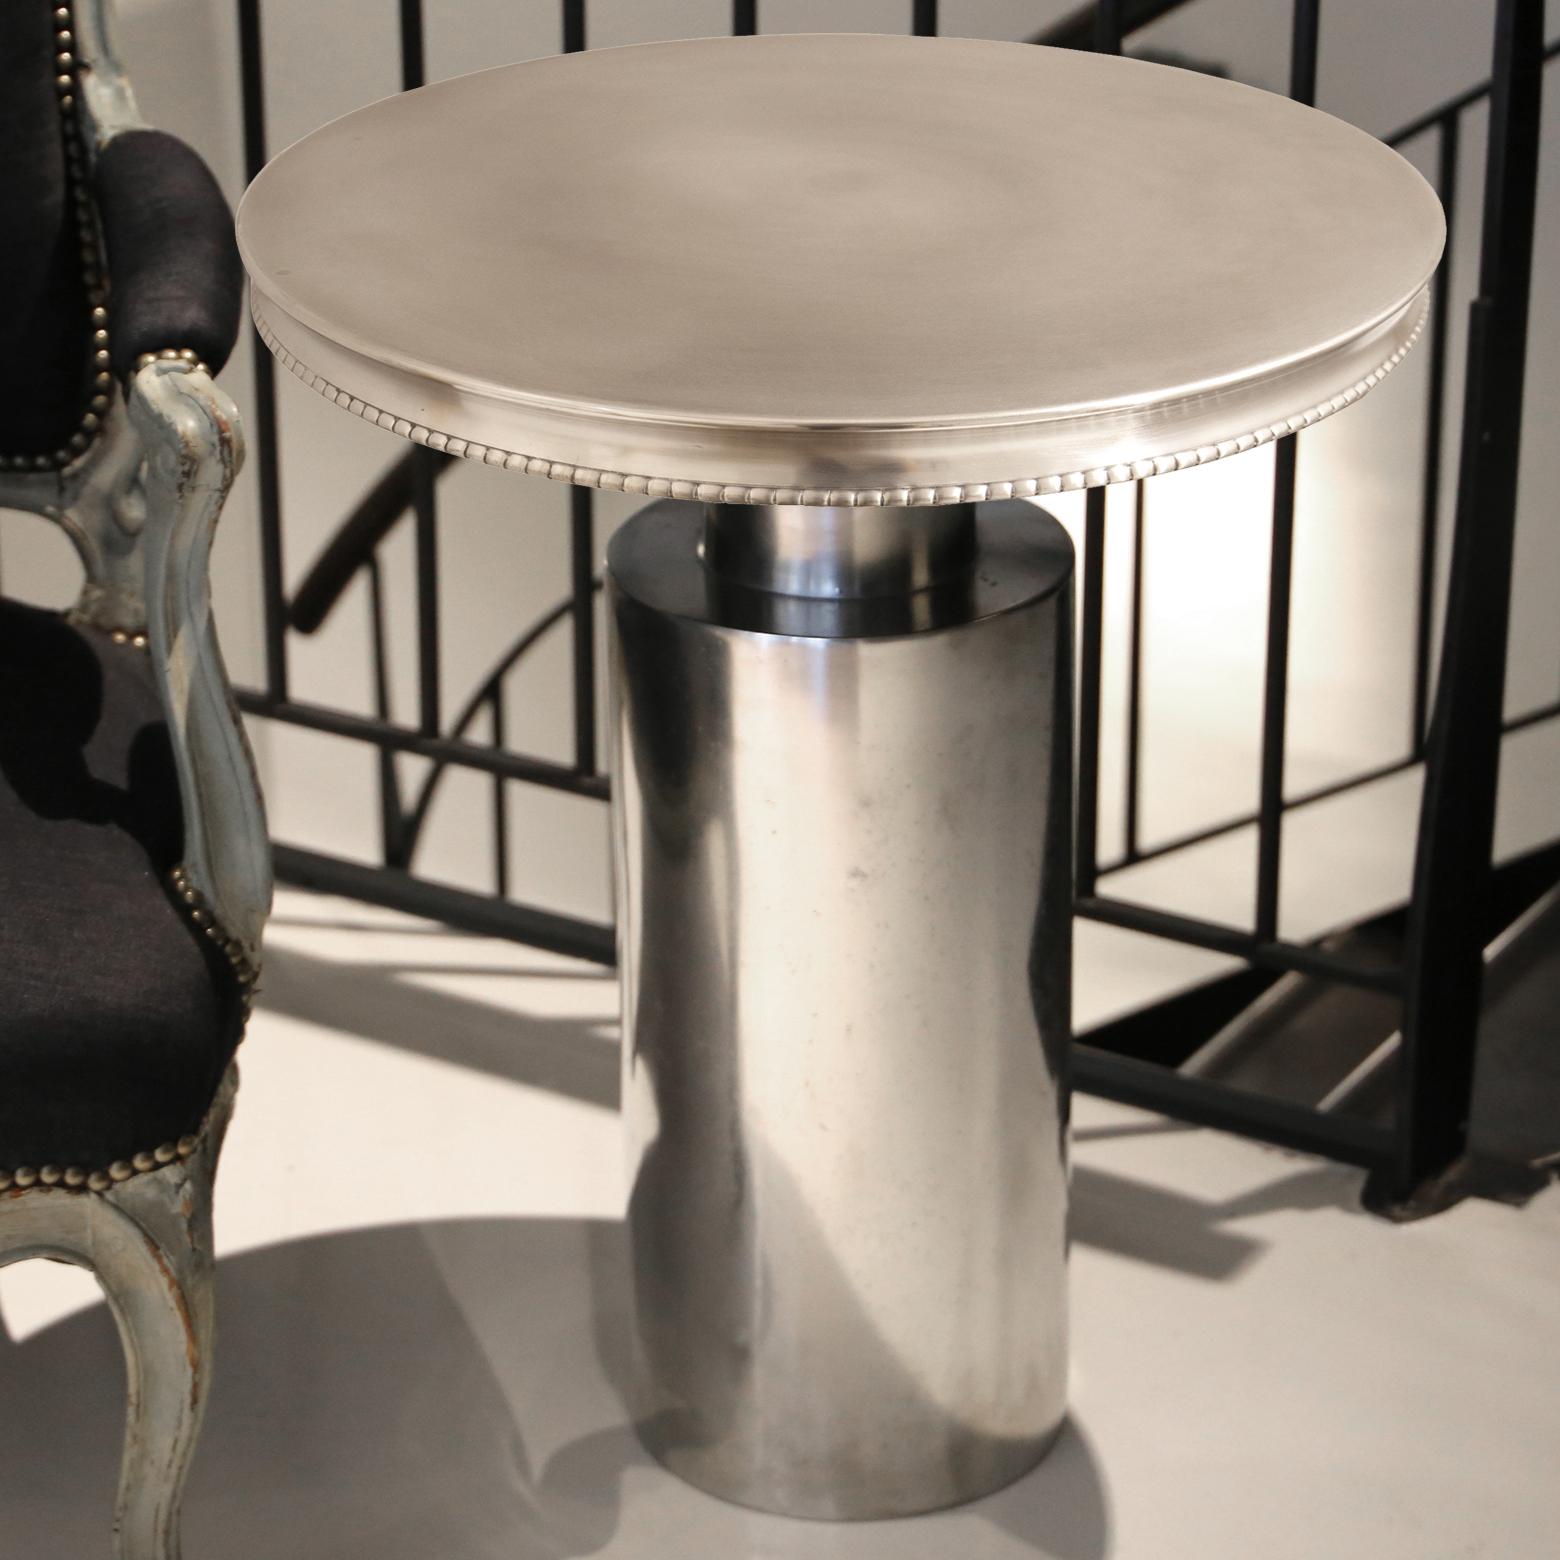 Made to order. We can offer different mouldings or finish.
This side table (board and pedestal) is made of culinary pewter hammered onto a wooden form, like the famous french pewter countertops which has been part of Parisian cafés and bars' life